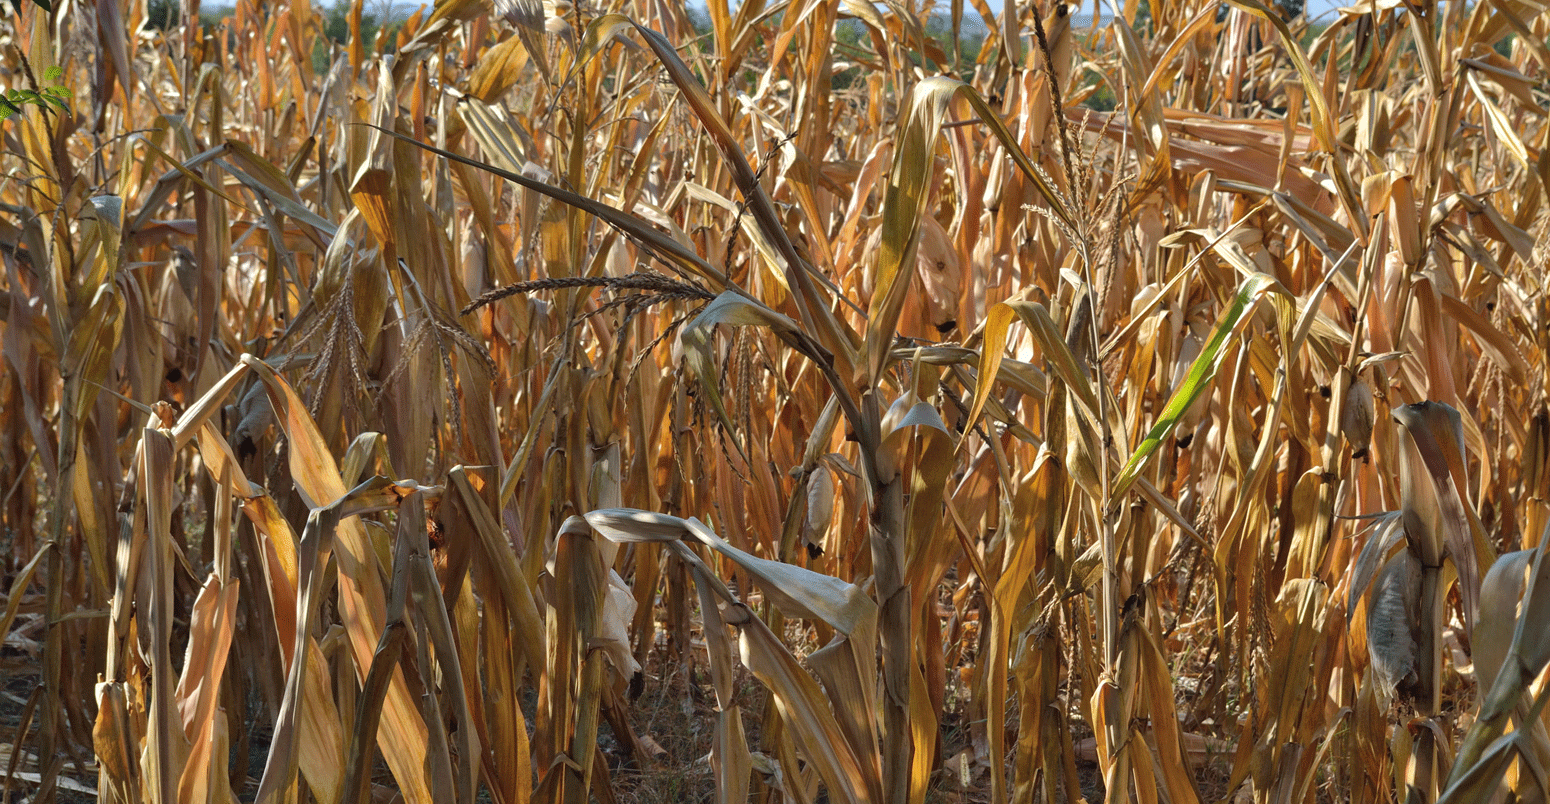 Dry maize plants and corn cobs in field in Serbia, Eastern Europe